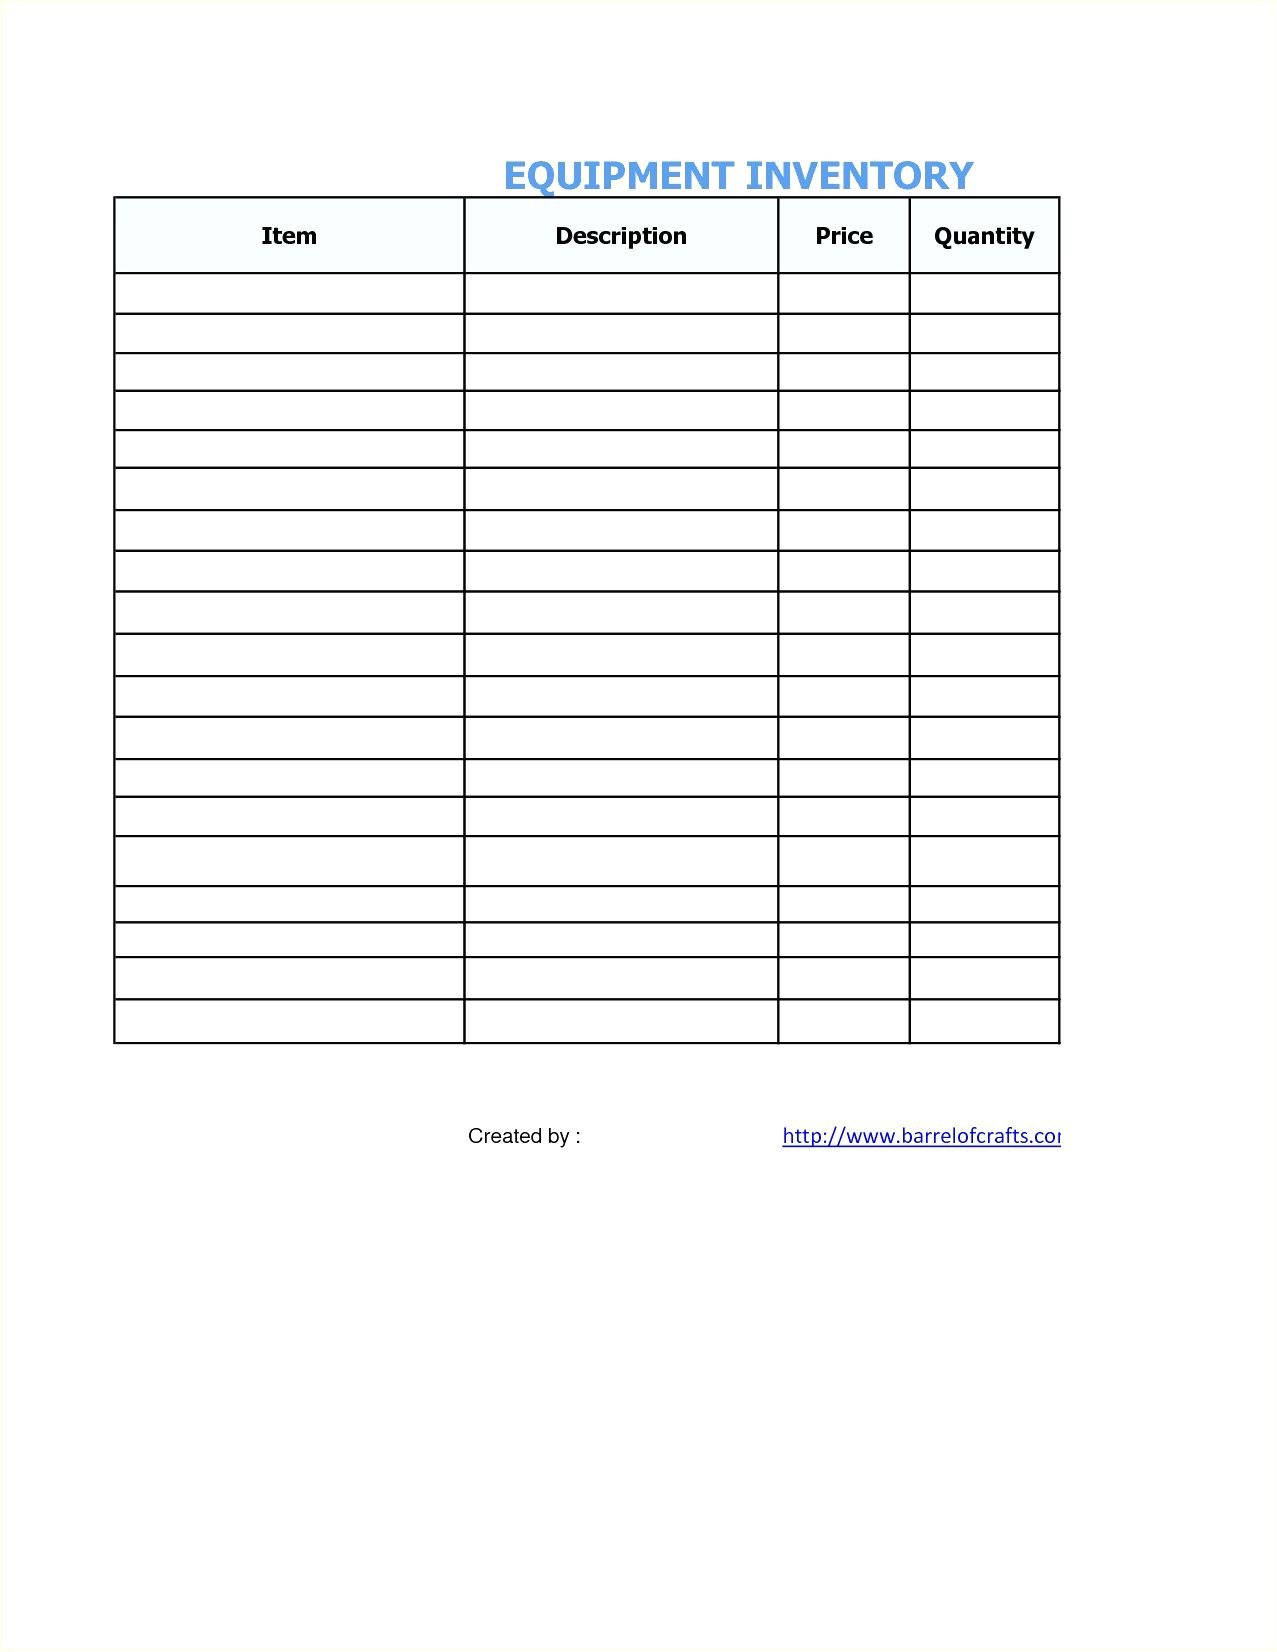 Freezer Inventory Excel Template – Resume 2019 Within Football Equipment Inventory Spreadsheet